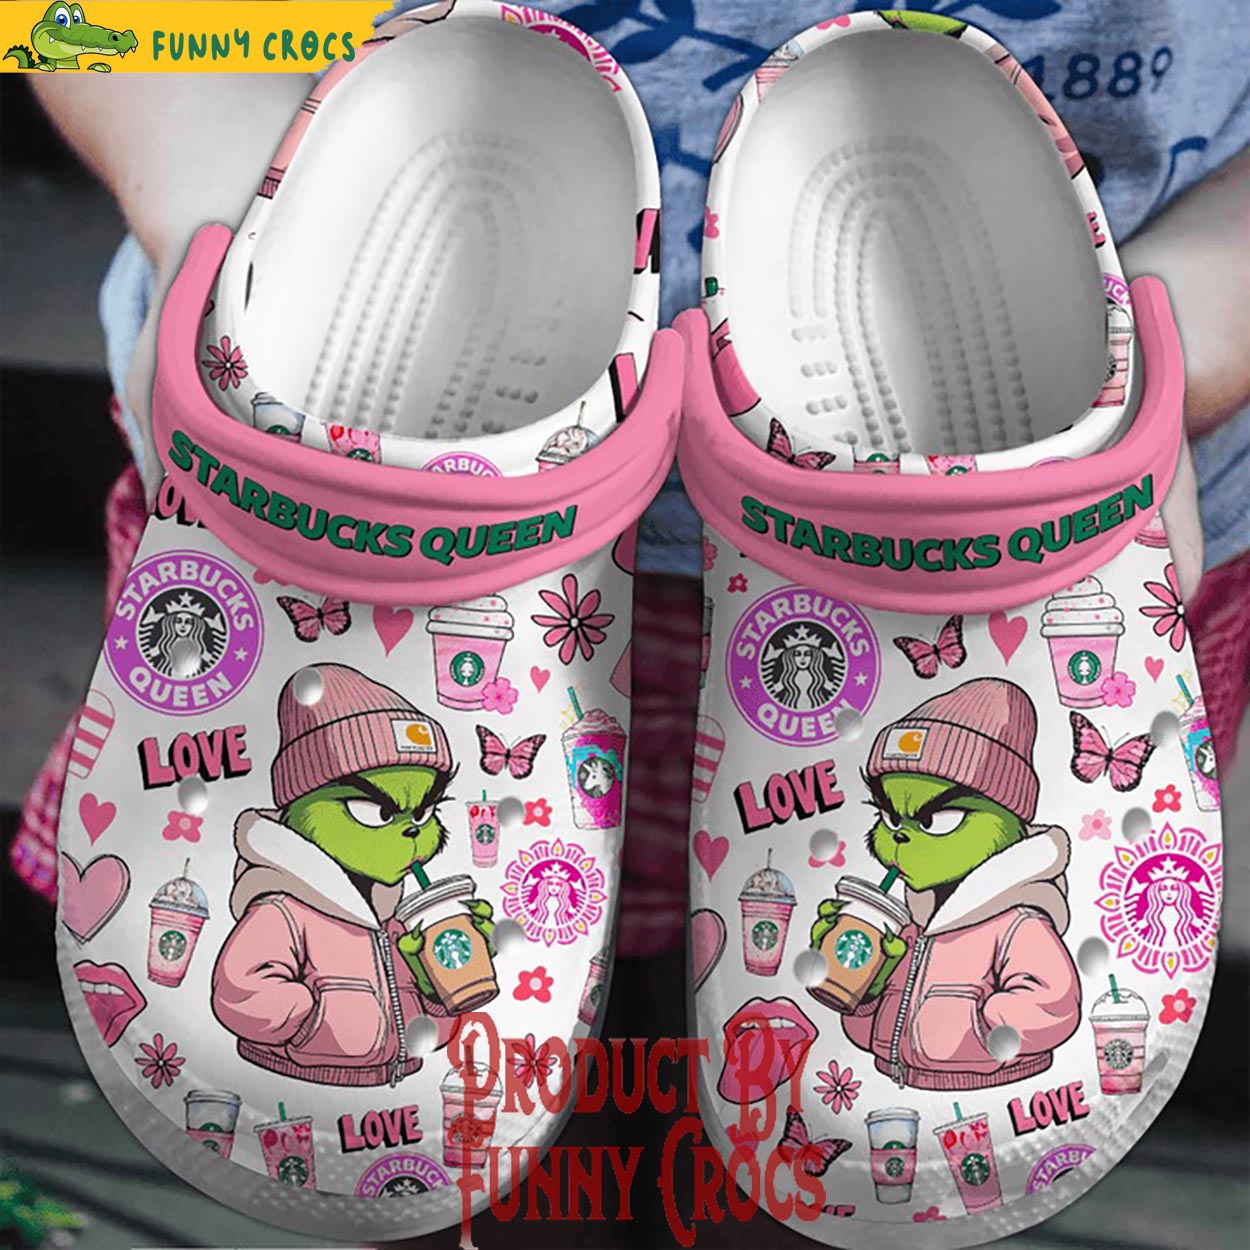 Starbucks Queen Grinch Crocs Shoes - Discover Comfort And Style Clog ...